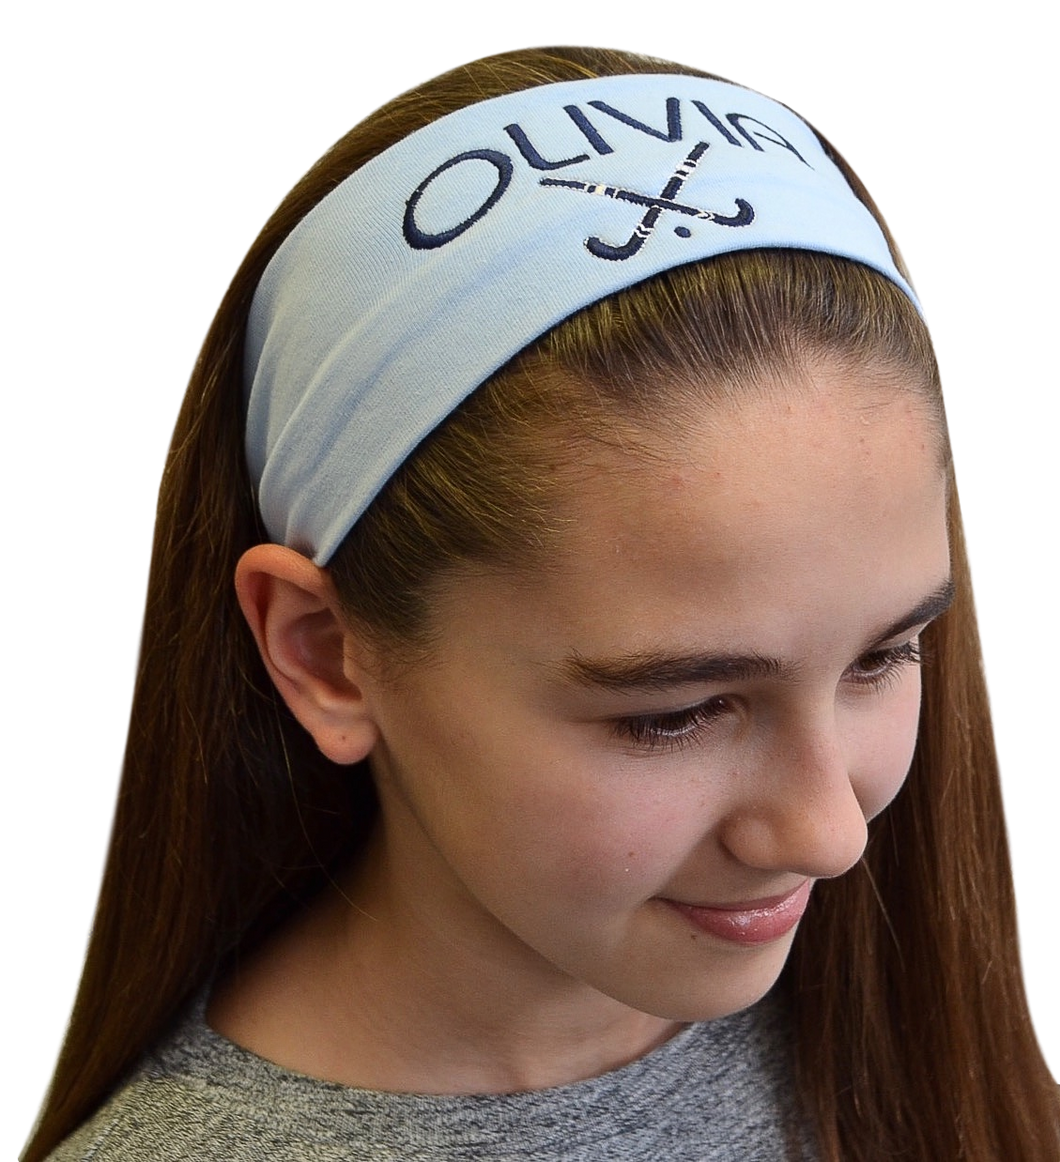 Personalized Monogrammed EMBROIDERED Field Hockey Cotton Stretch Headband - Quantity Discounts